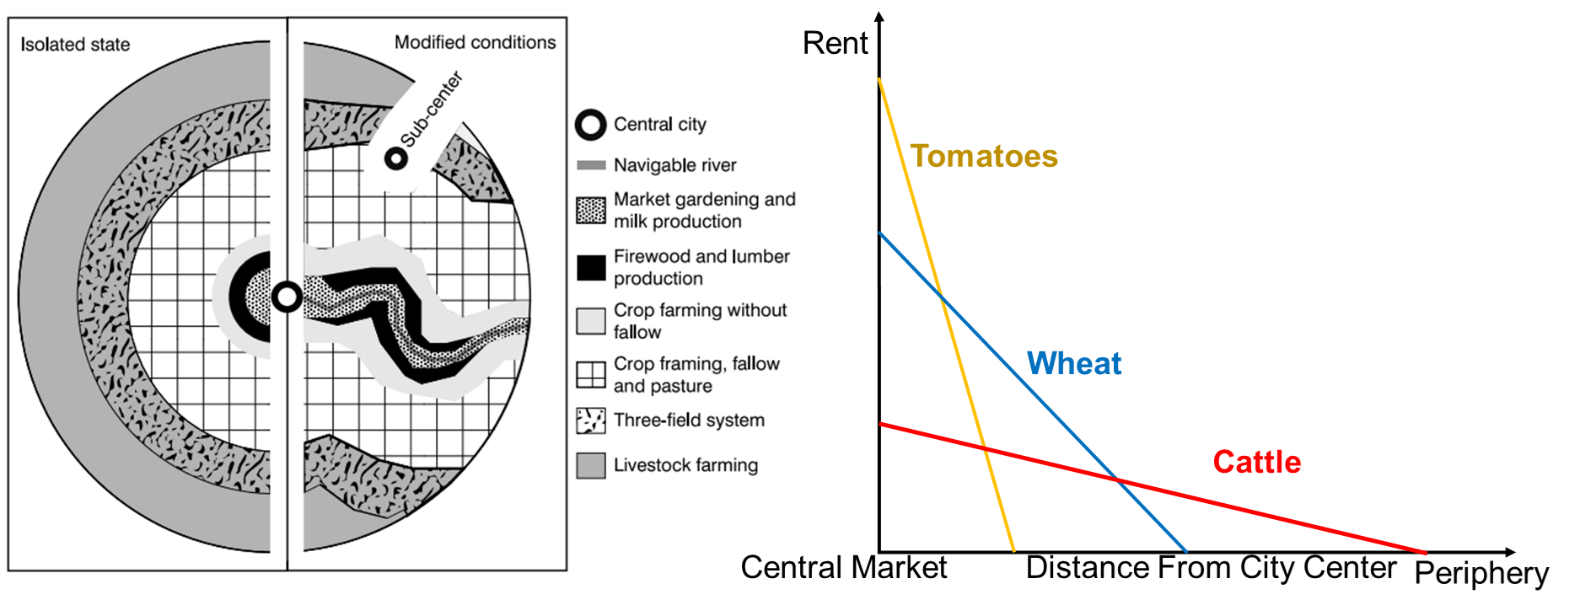 the graphical representation of the distance gradient of activities with varying distance to central business district which is related to transportation costs.